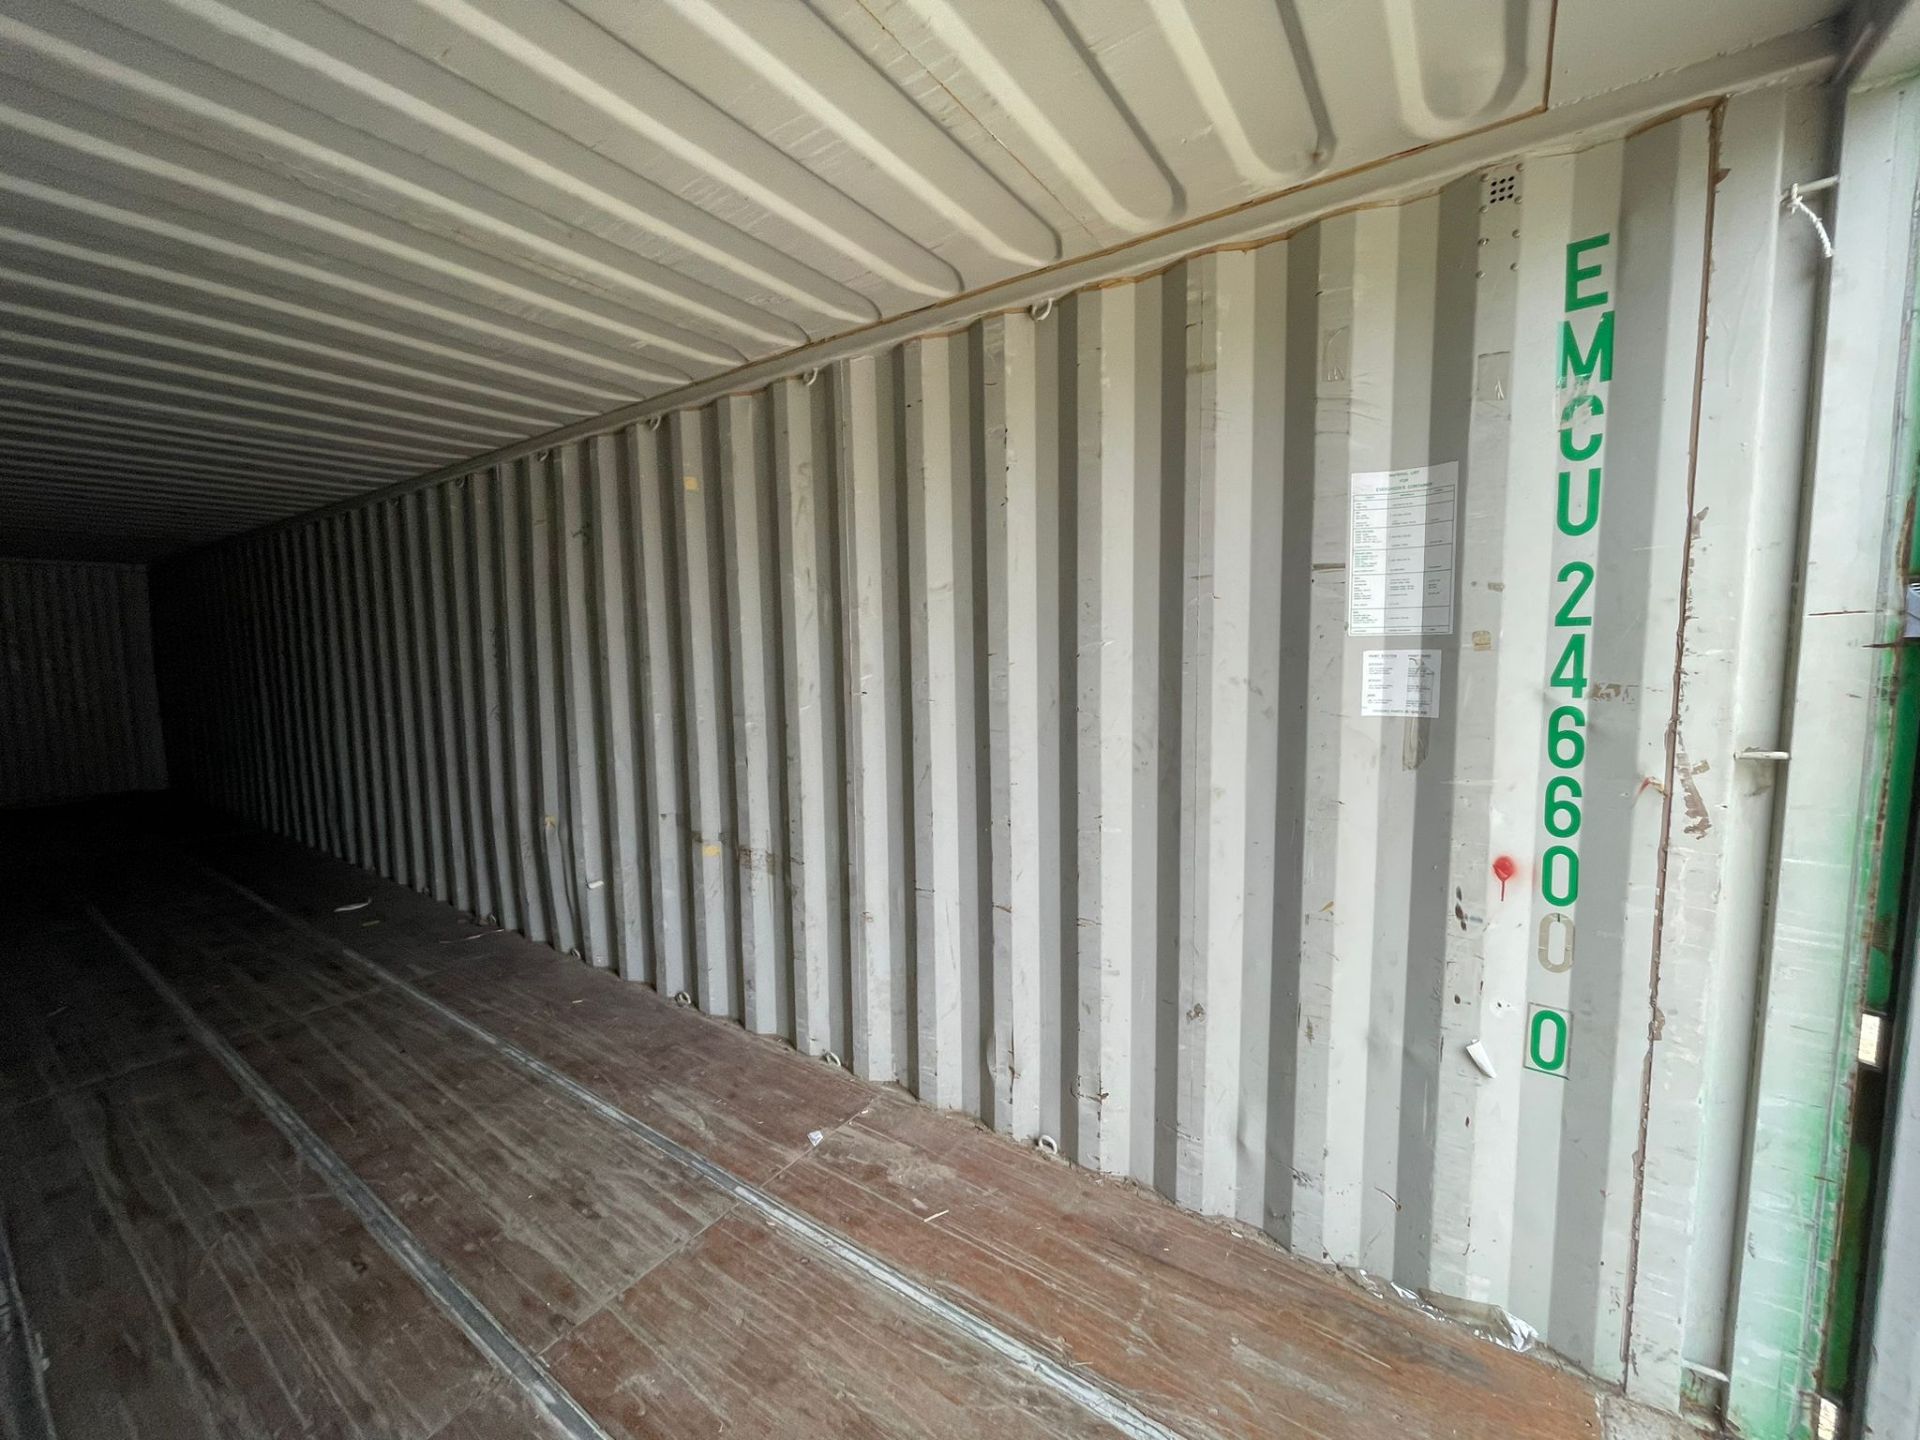 Shipping Container - ref EMCU2466000 - NO RESERVE (40’ GP - Standard) - Image 2 of 4